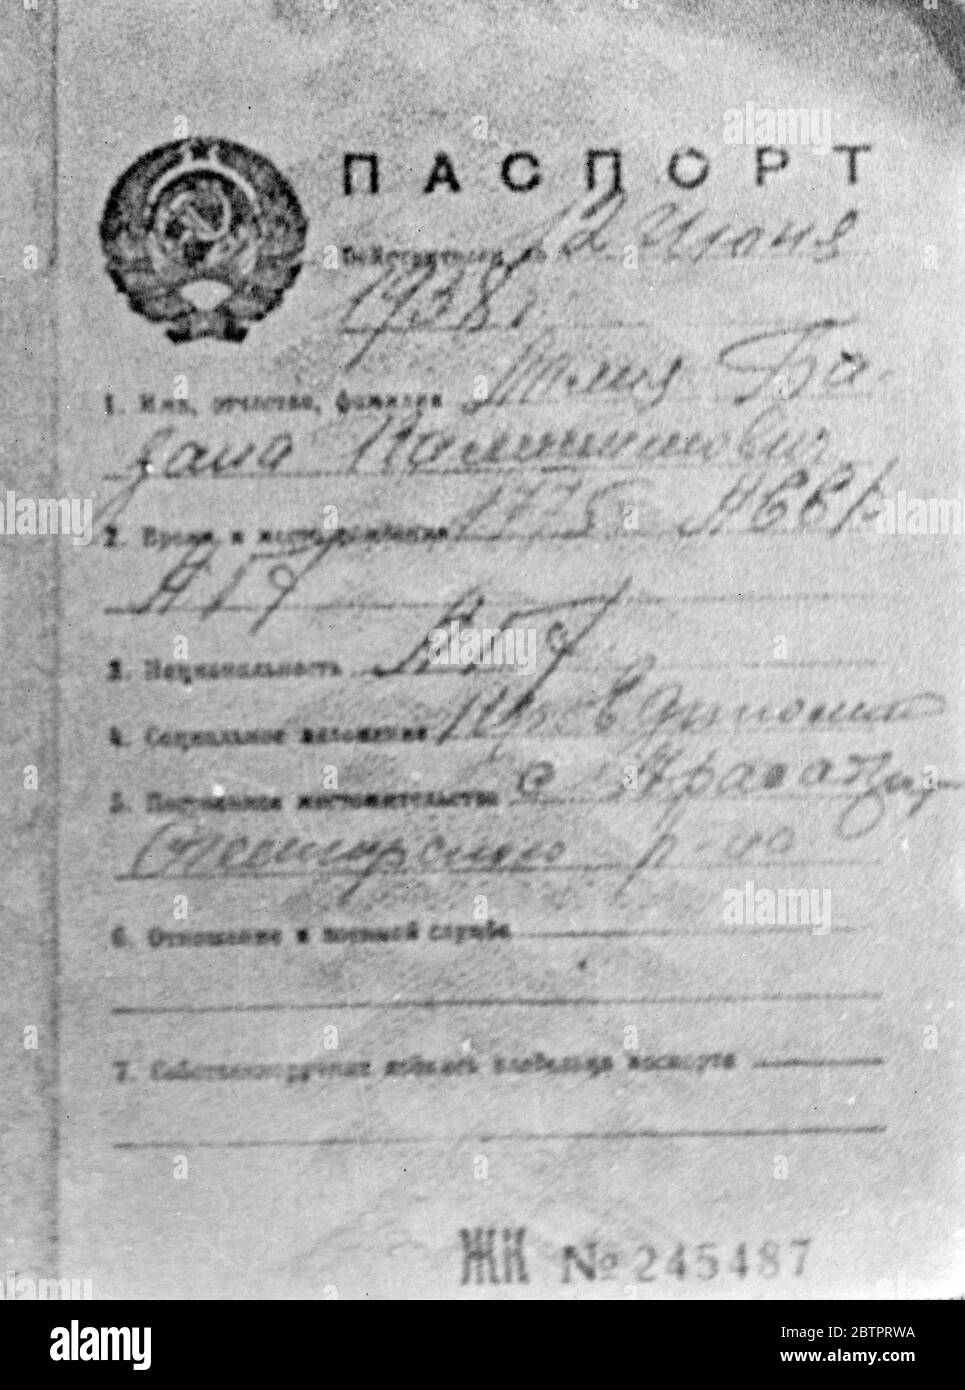 Date of birth, 1775. Passport of world's oldest man. Bazala Lolia, who lives in the mountains of Abkhazia (Georgian Soviet Republic) is 162 years of age, and can prove it. He has a passport giving the date of his birth as 1775. Bazzala, who is probably the oldest man in the world, comes from a district which is notable for the number of its centenarians. 17 November 1937 Stock Photo